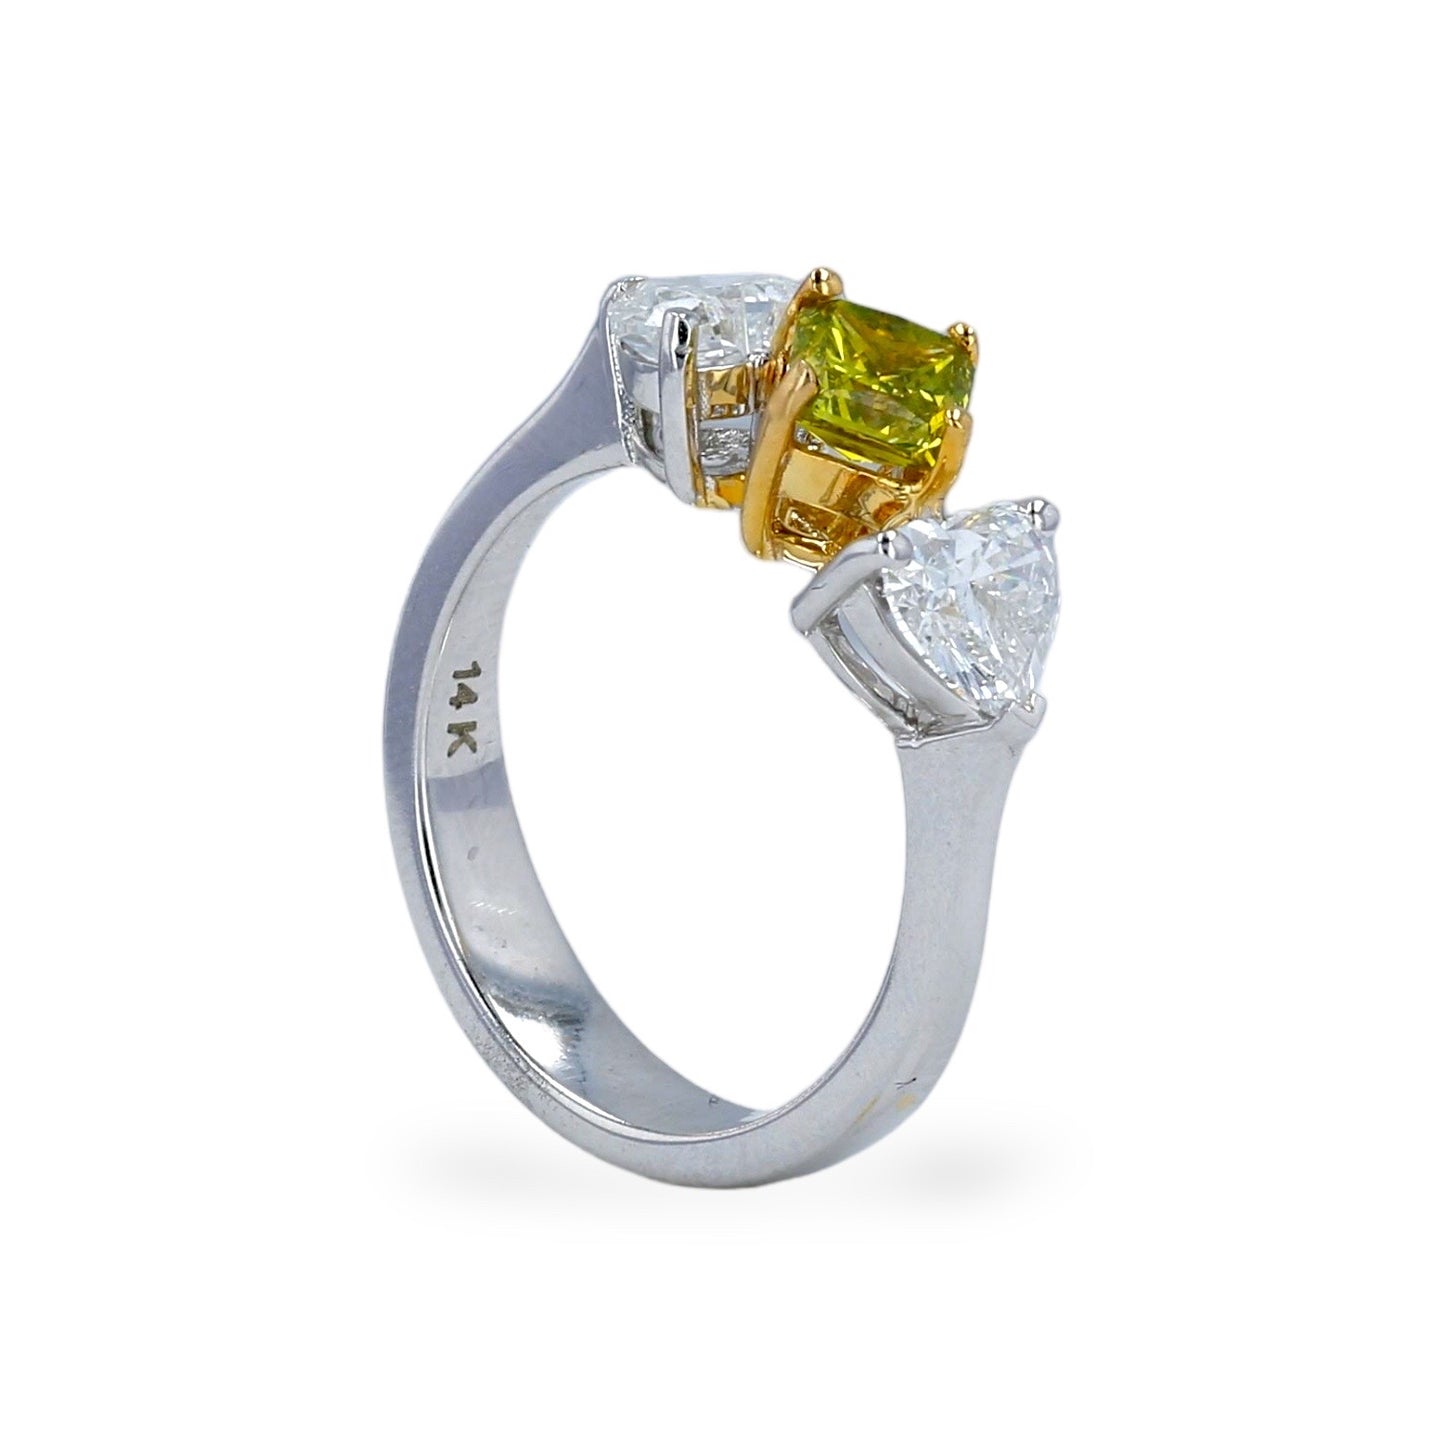 White 14k gold solitaire canary diamond ring